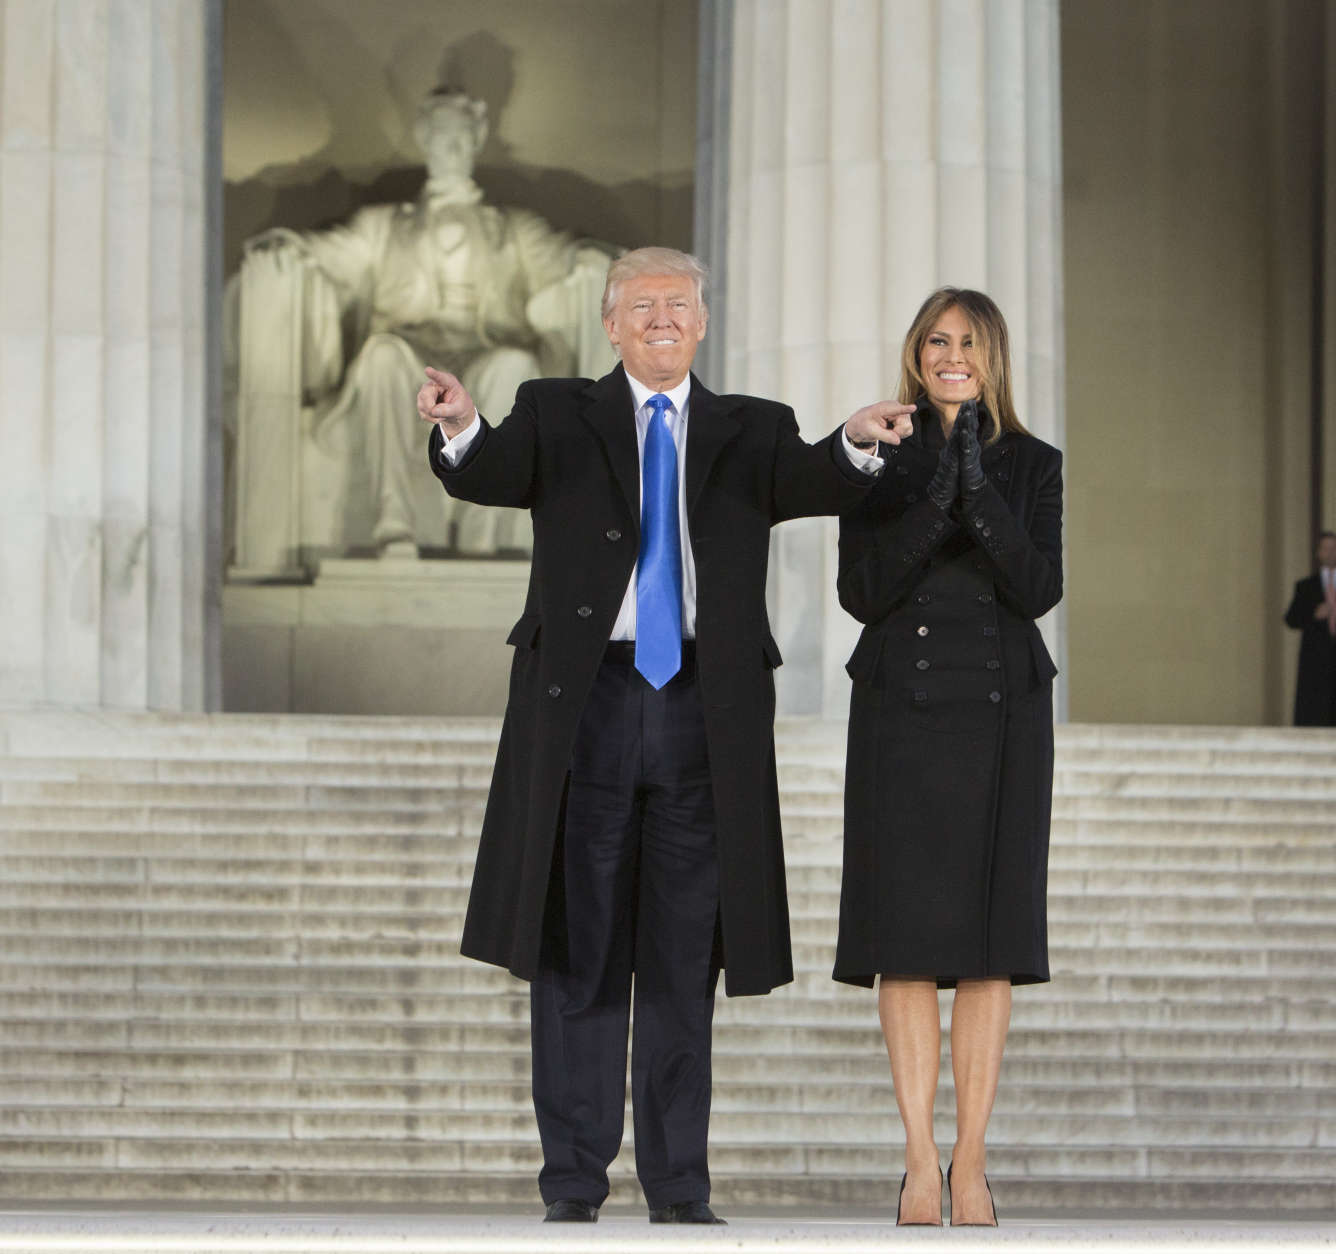 WASHINGTON, DC - JANUARY 19:  (AFP OUT) President-elect of The United States Donald J. Trump and first lady-elect of The United States Meliana Trump arrive at the "Make America Great Again Welcome Celebration concert at the Lincoln Memorial in January 19, 2017 in Washington, DC. Hundreds of thousands of people are expected to come to the National Mall to witness Trump being sworn in as the 45th president of the United States. (Photo by Chris Kleponis-Pool/Getty Images)